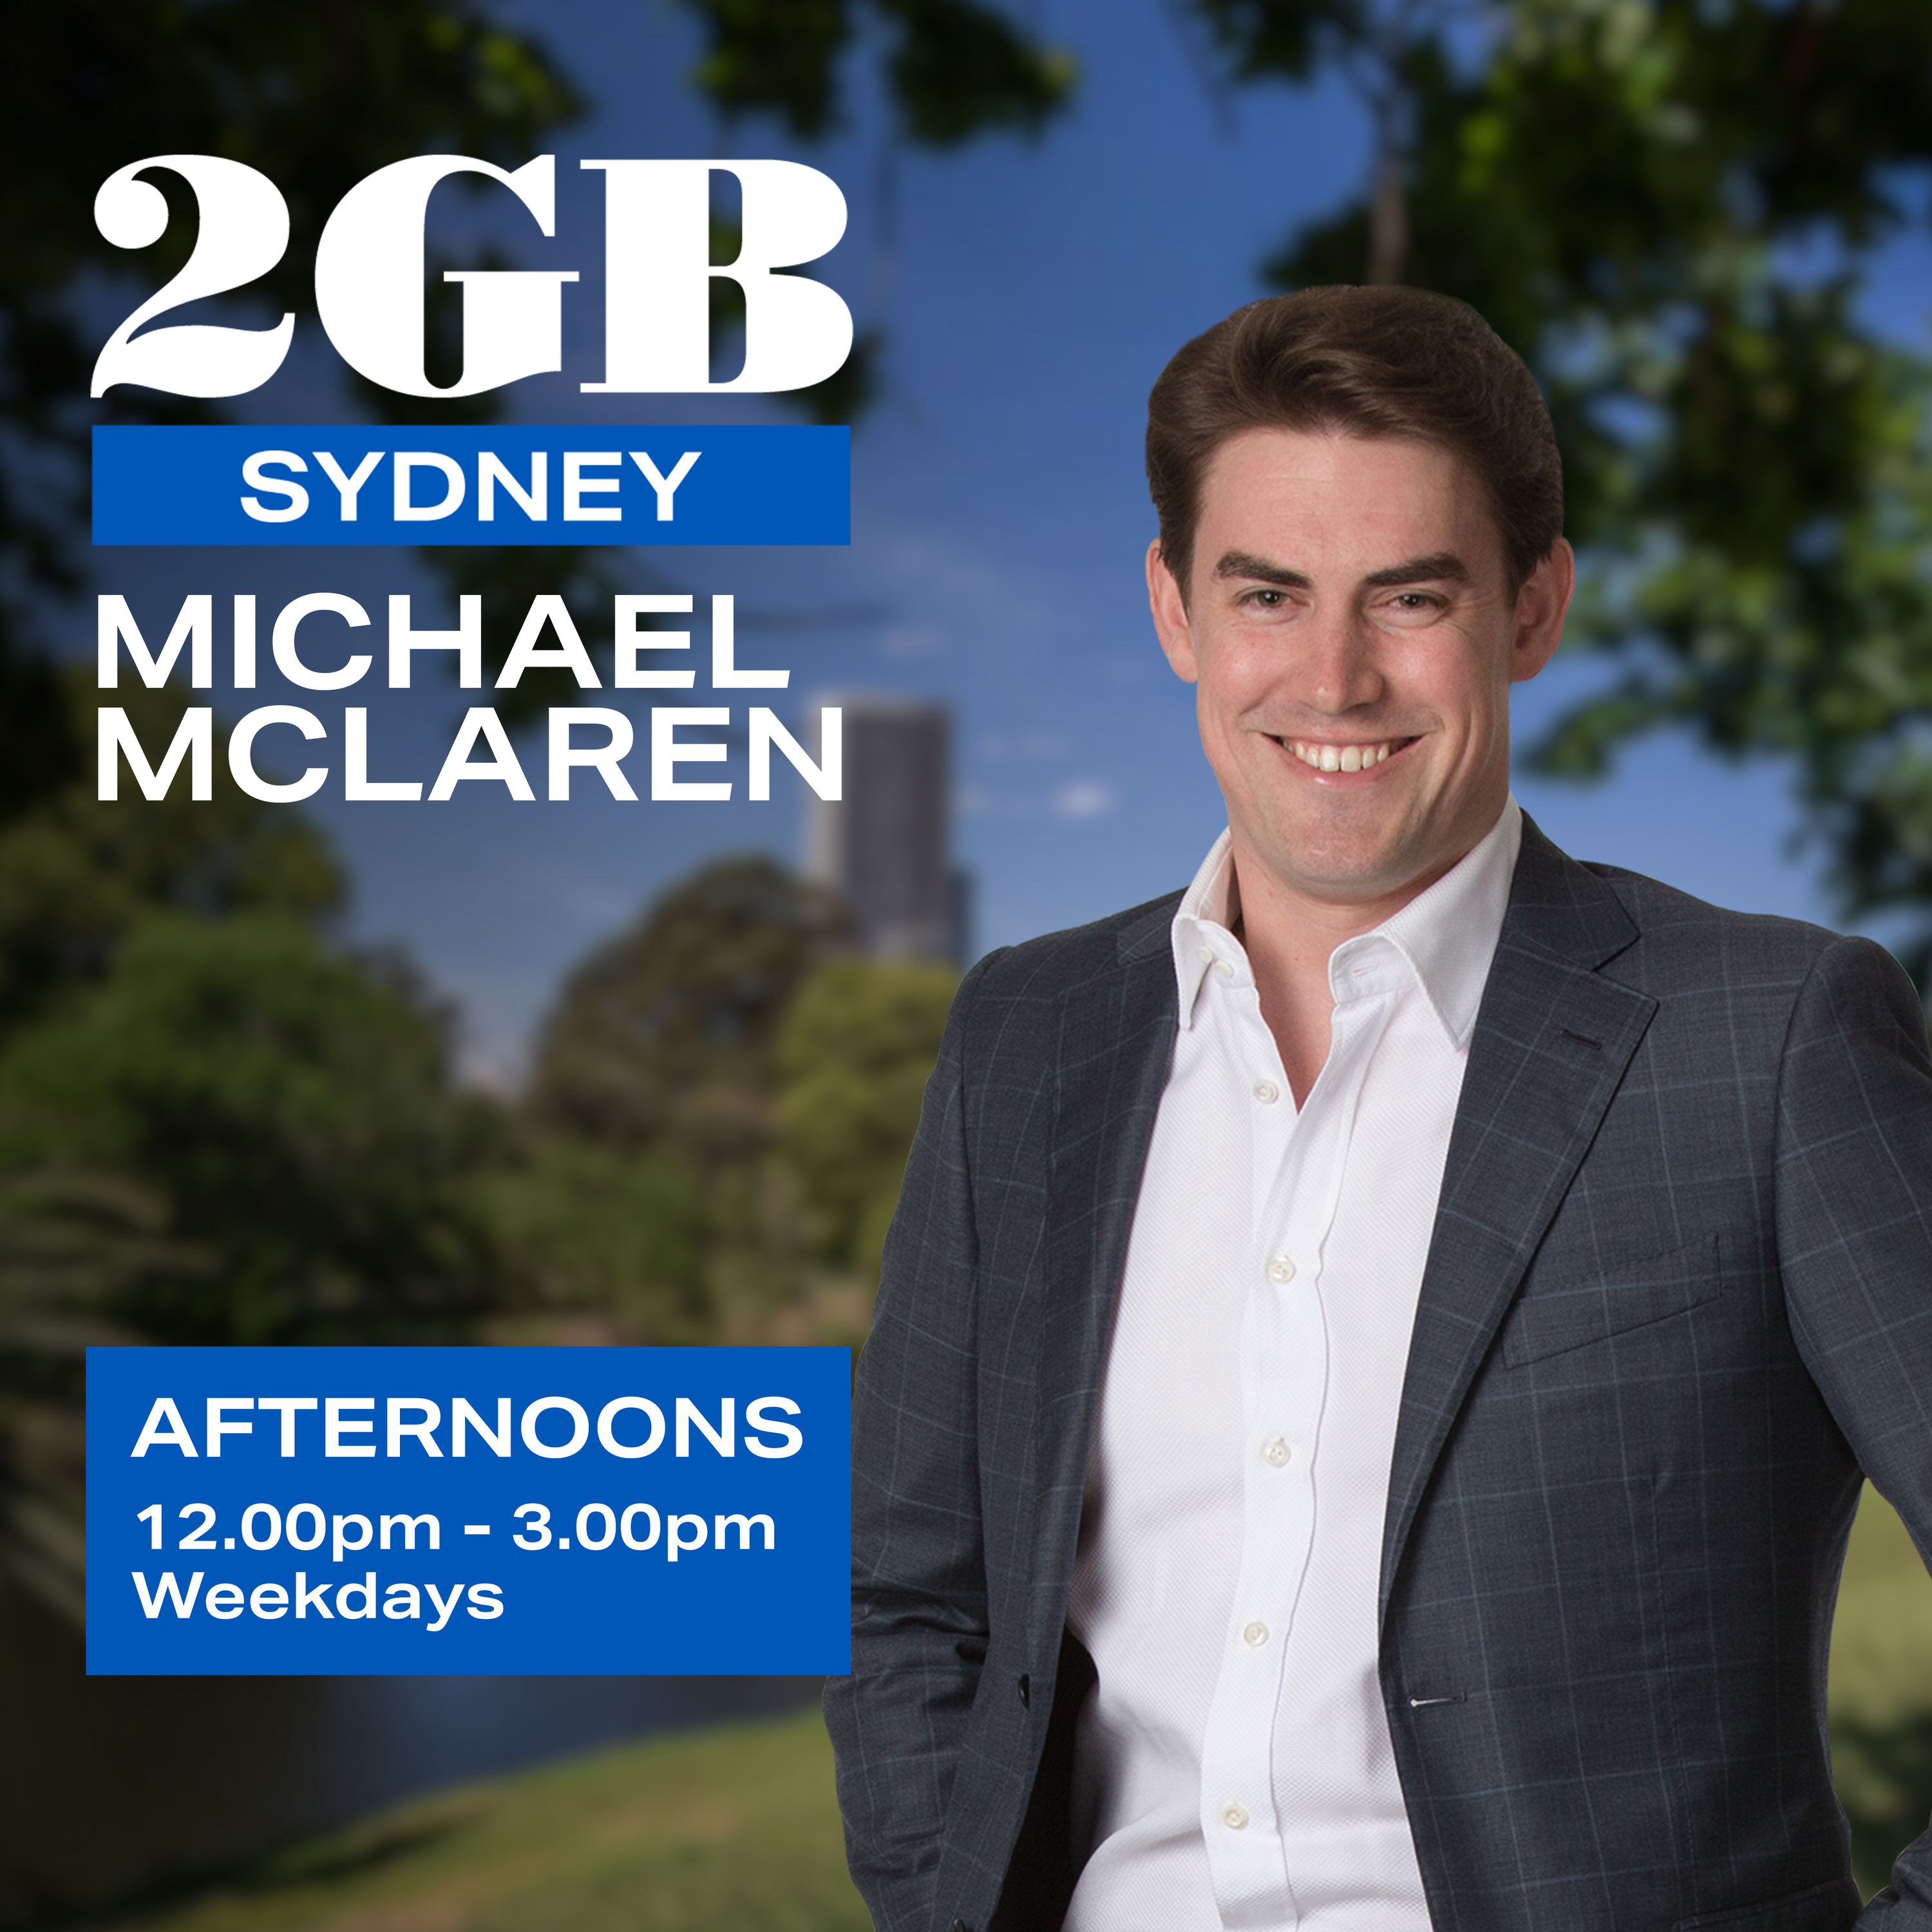 Afternoons with Michael McLaren - Friday, 12th July